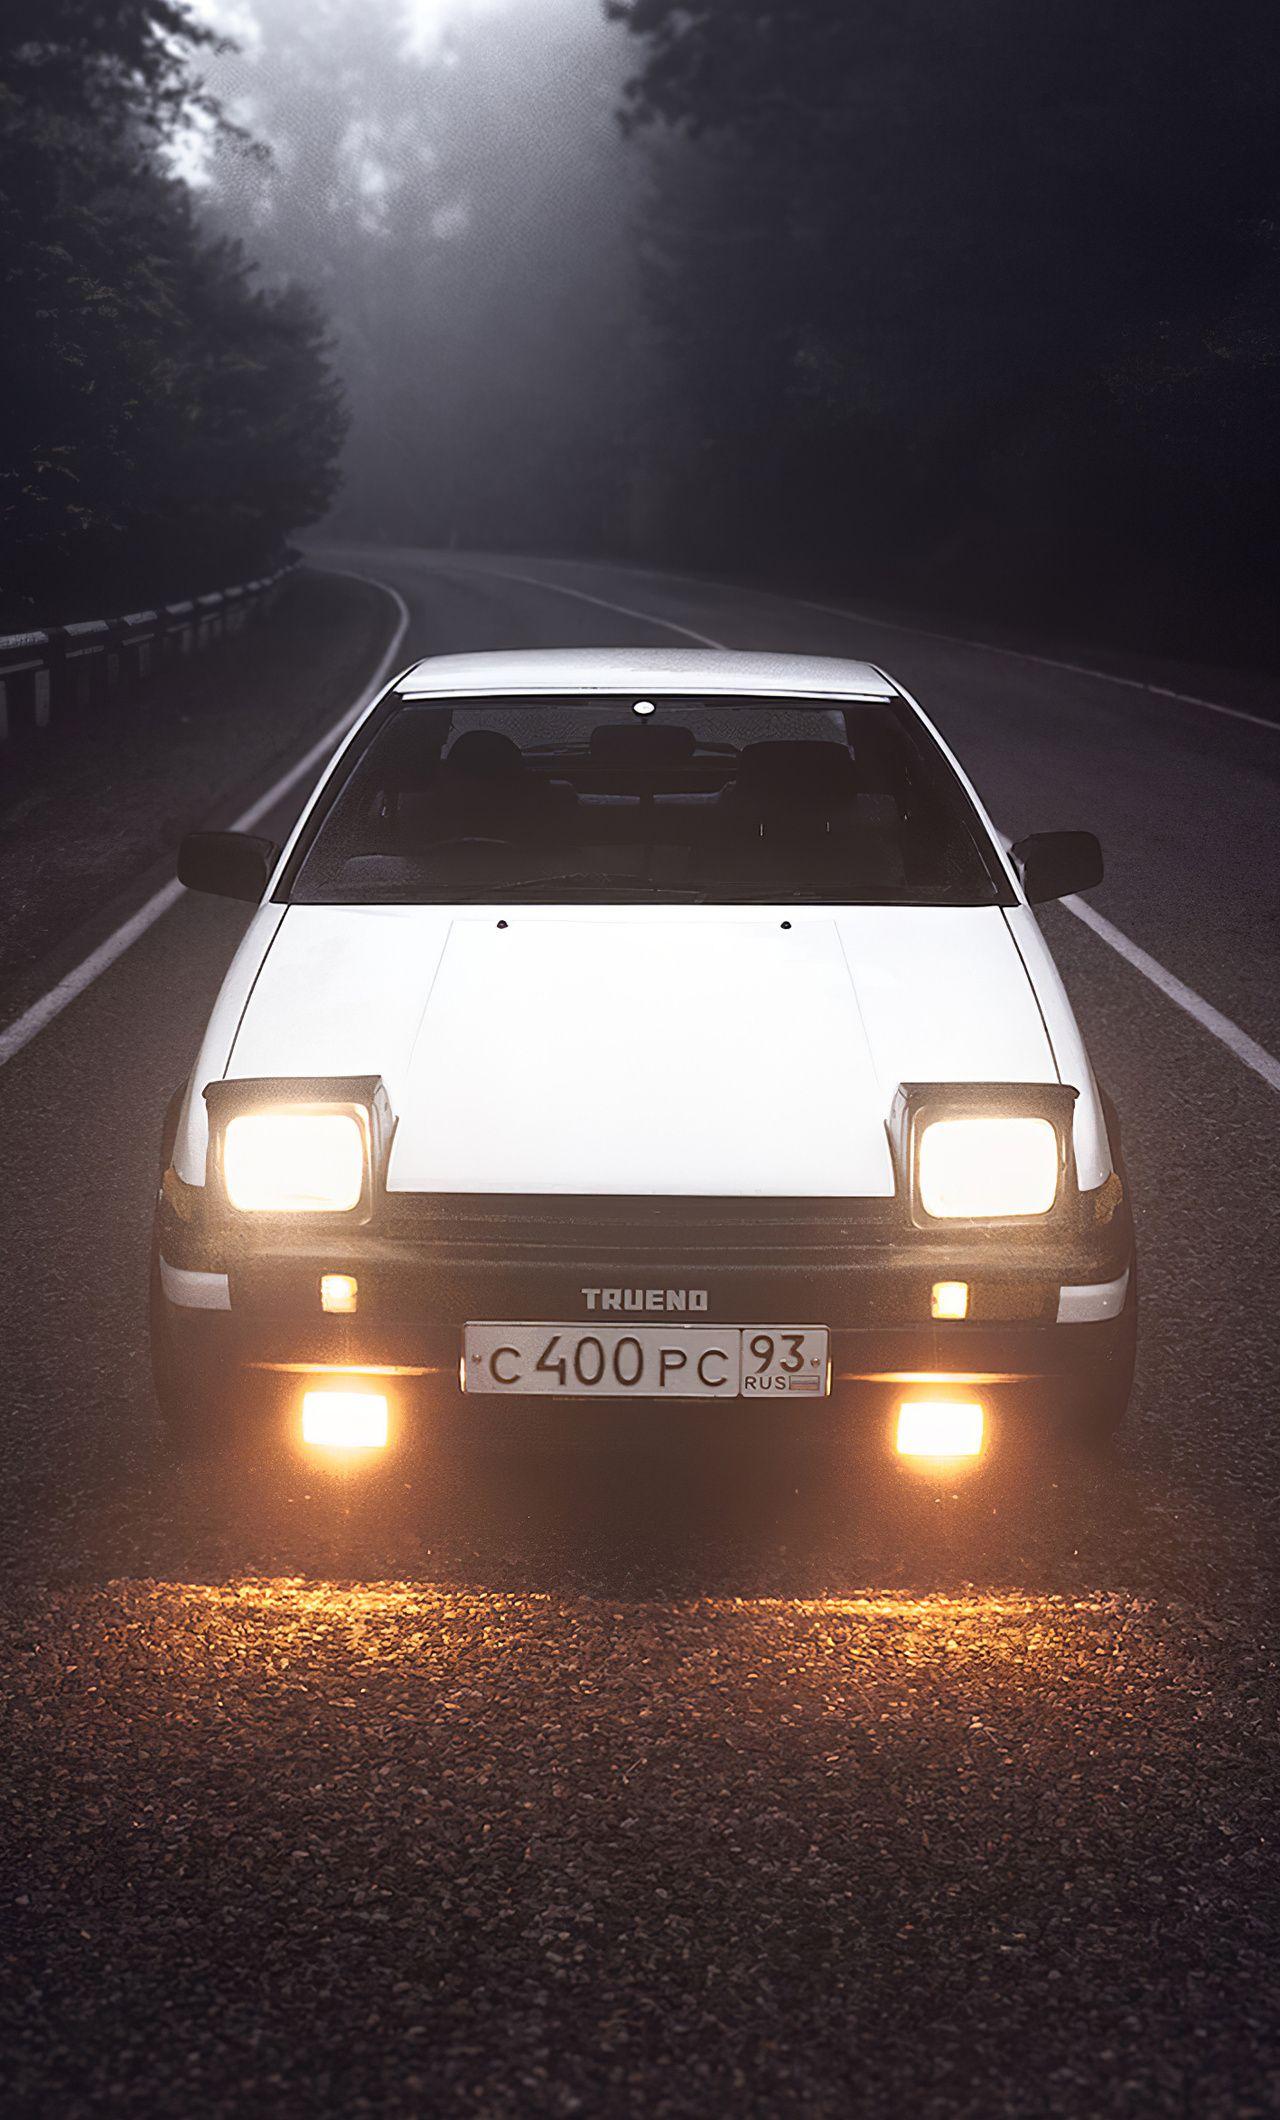 Toyota Ae86 Iphone Wallpapers Top Free Toyota Ae86 Iphone Backgrounds Wallpaperaccess